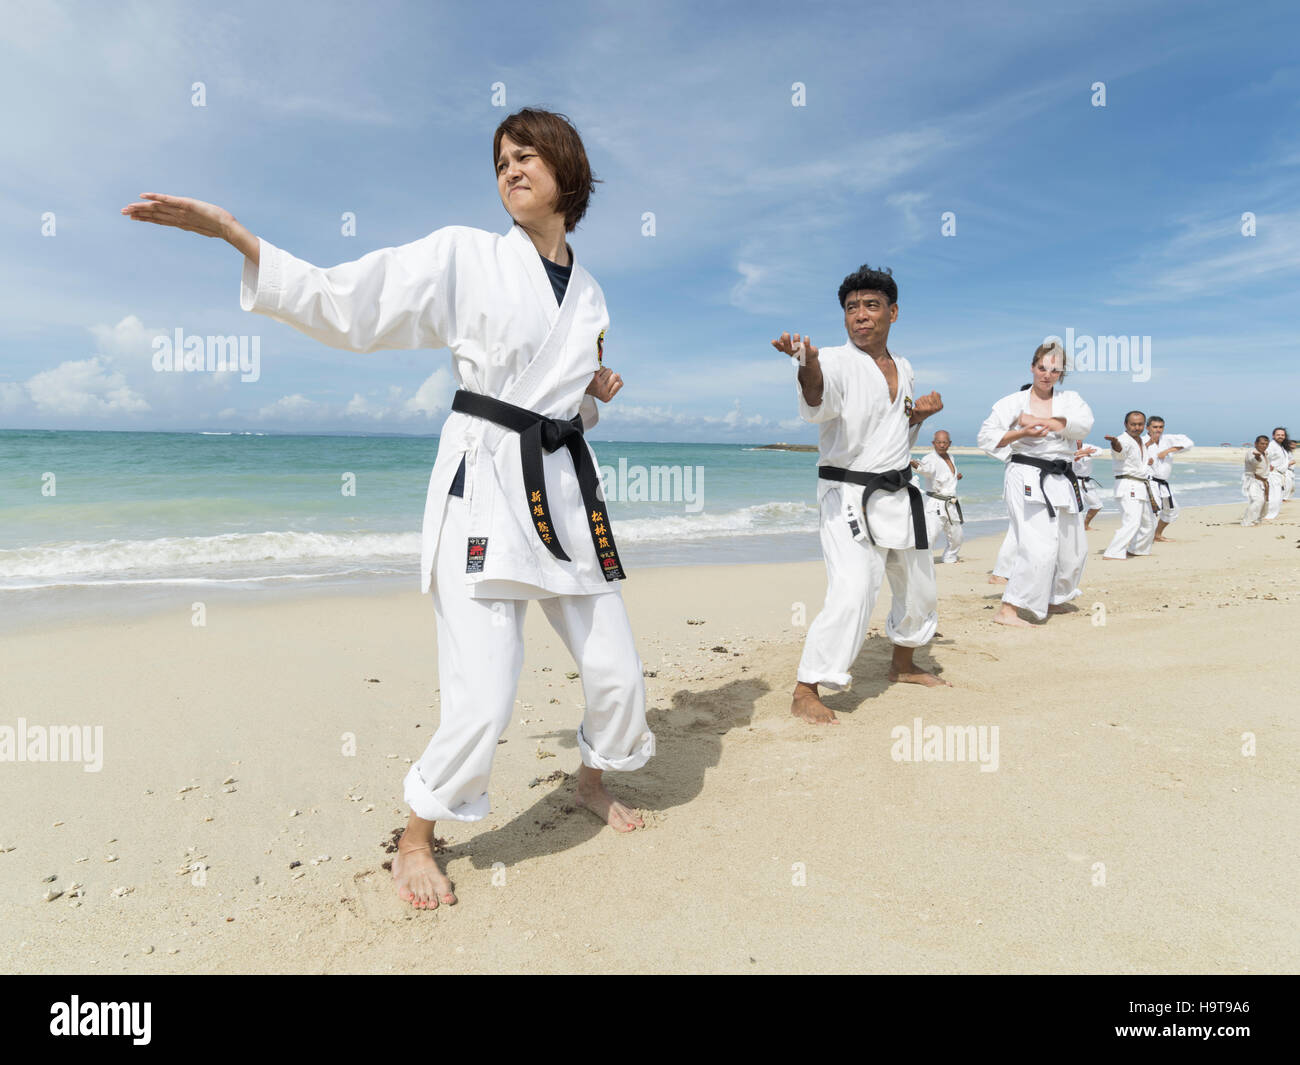 Performing karate kata in Okinawa the birthplace of karate as part of 100 Kata for Karate Day event 2016. Stock Photo